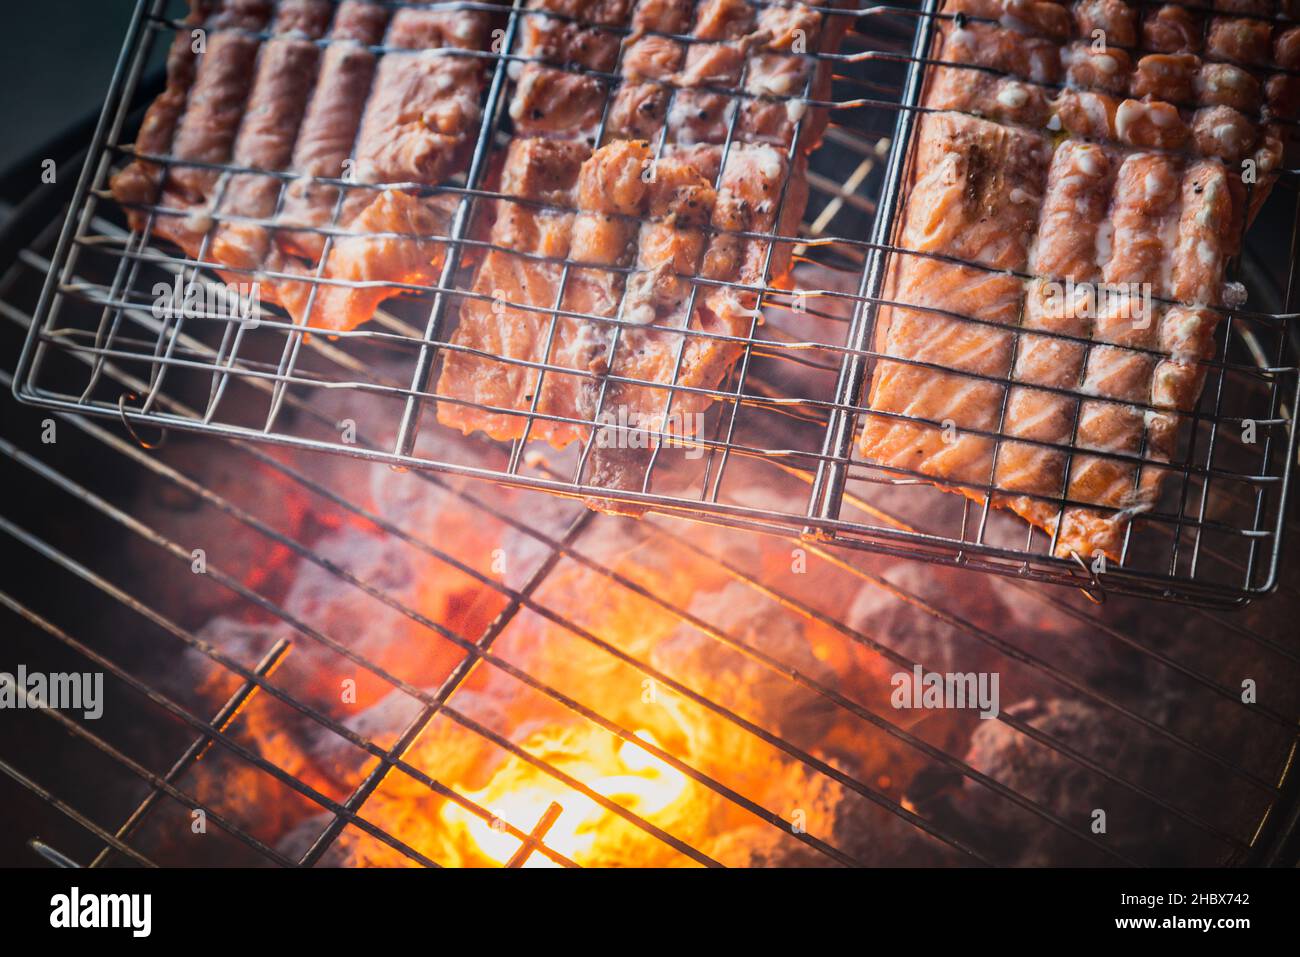 Outdoors: Salmon being grilled with live fire or burning charcoal in a BBQ bowl. Top or aerial view of red hot flame roasting raw steaks of fat fish Stock Photo